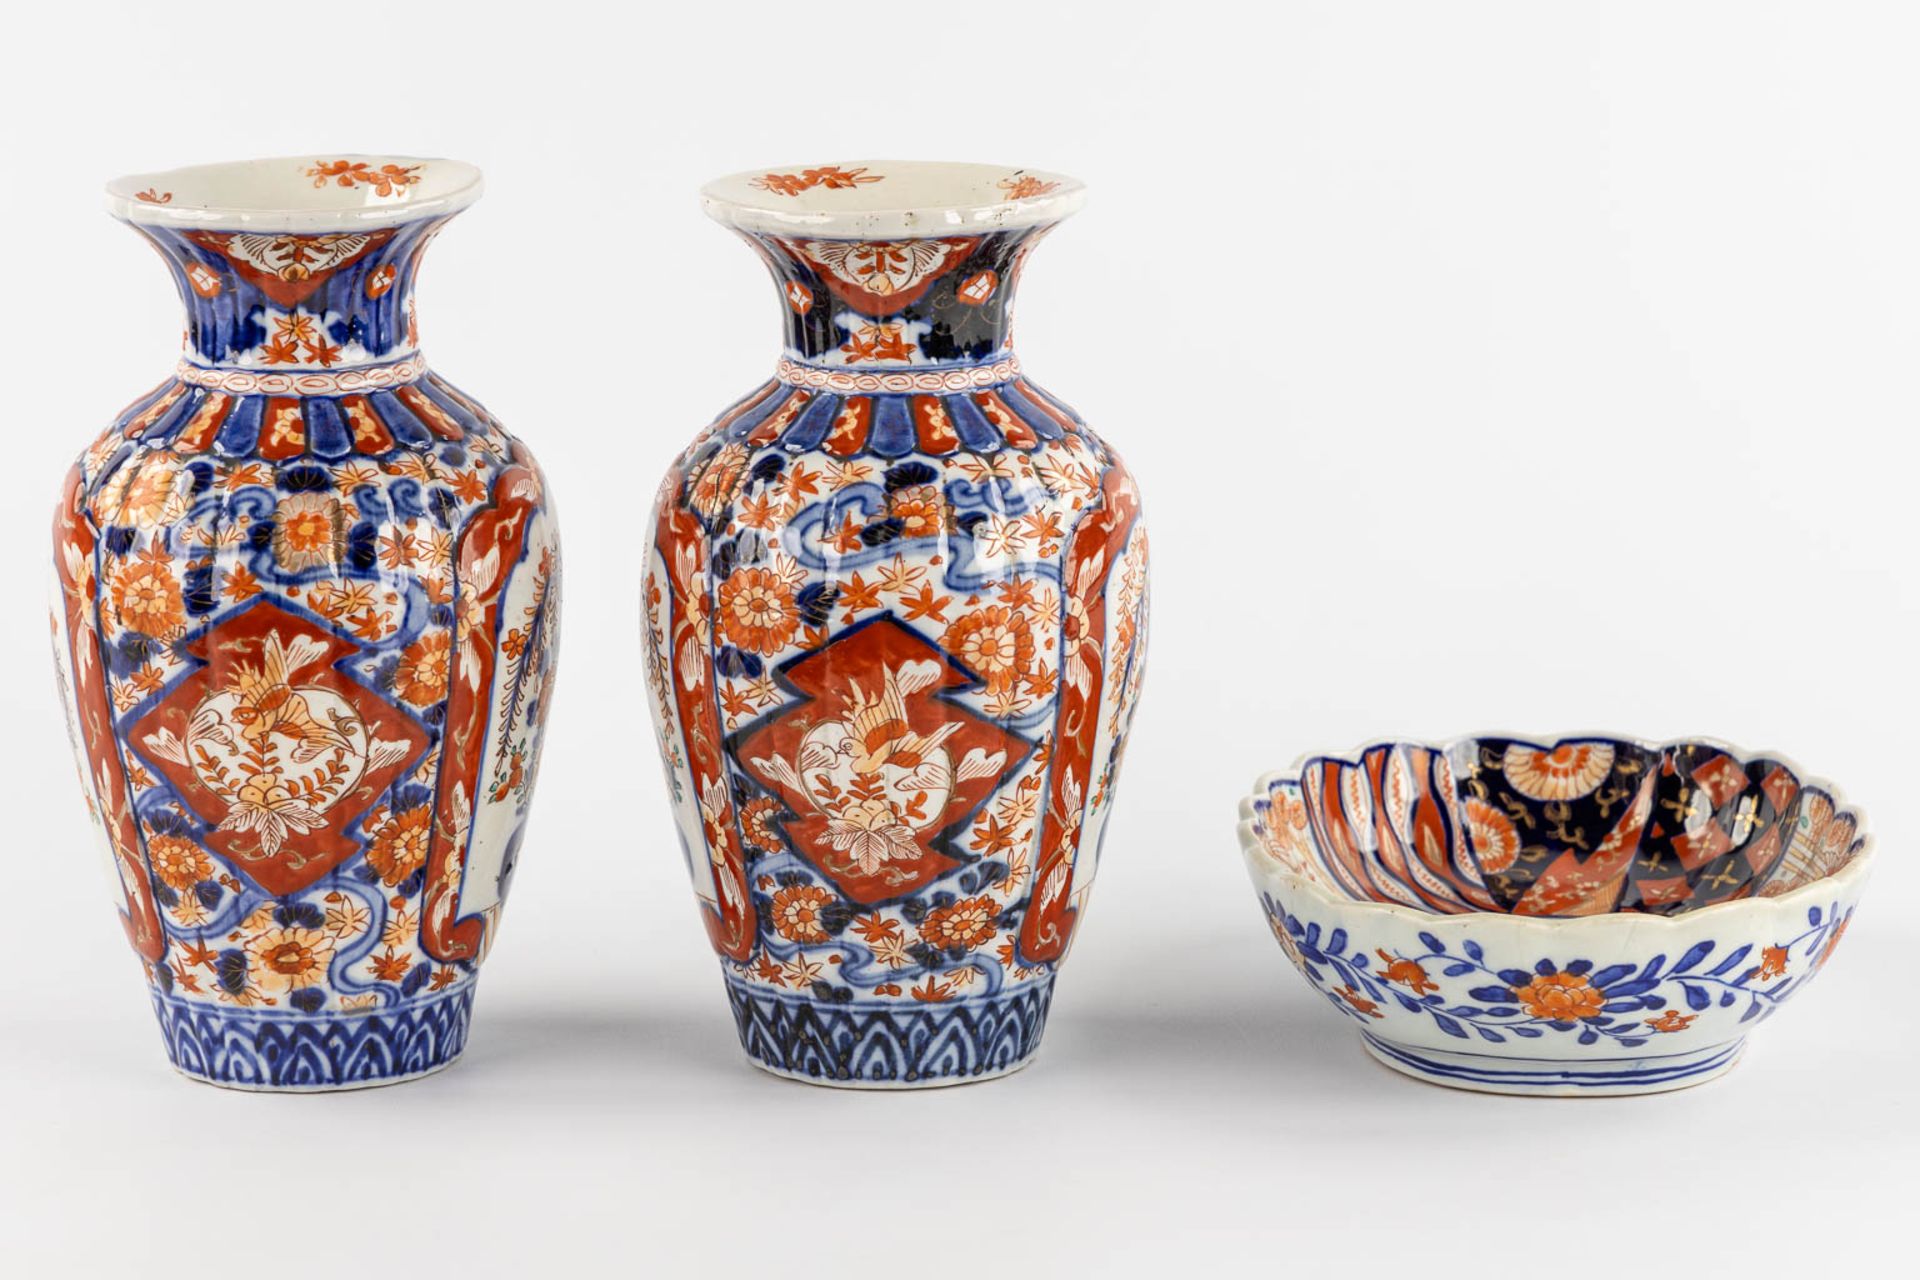 A pair of vases and a bowl, Japanese Imari porcelain. (H:25 x D:14 cm) - Image 6 of 11